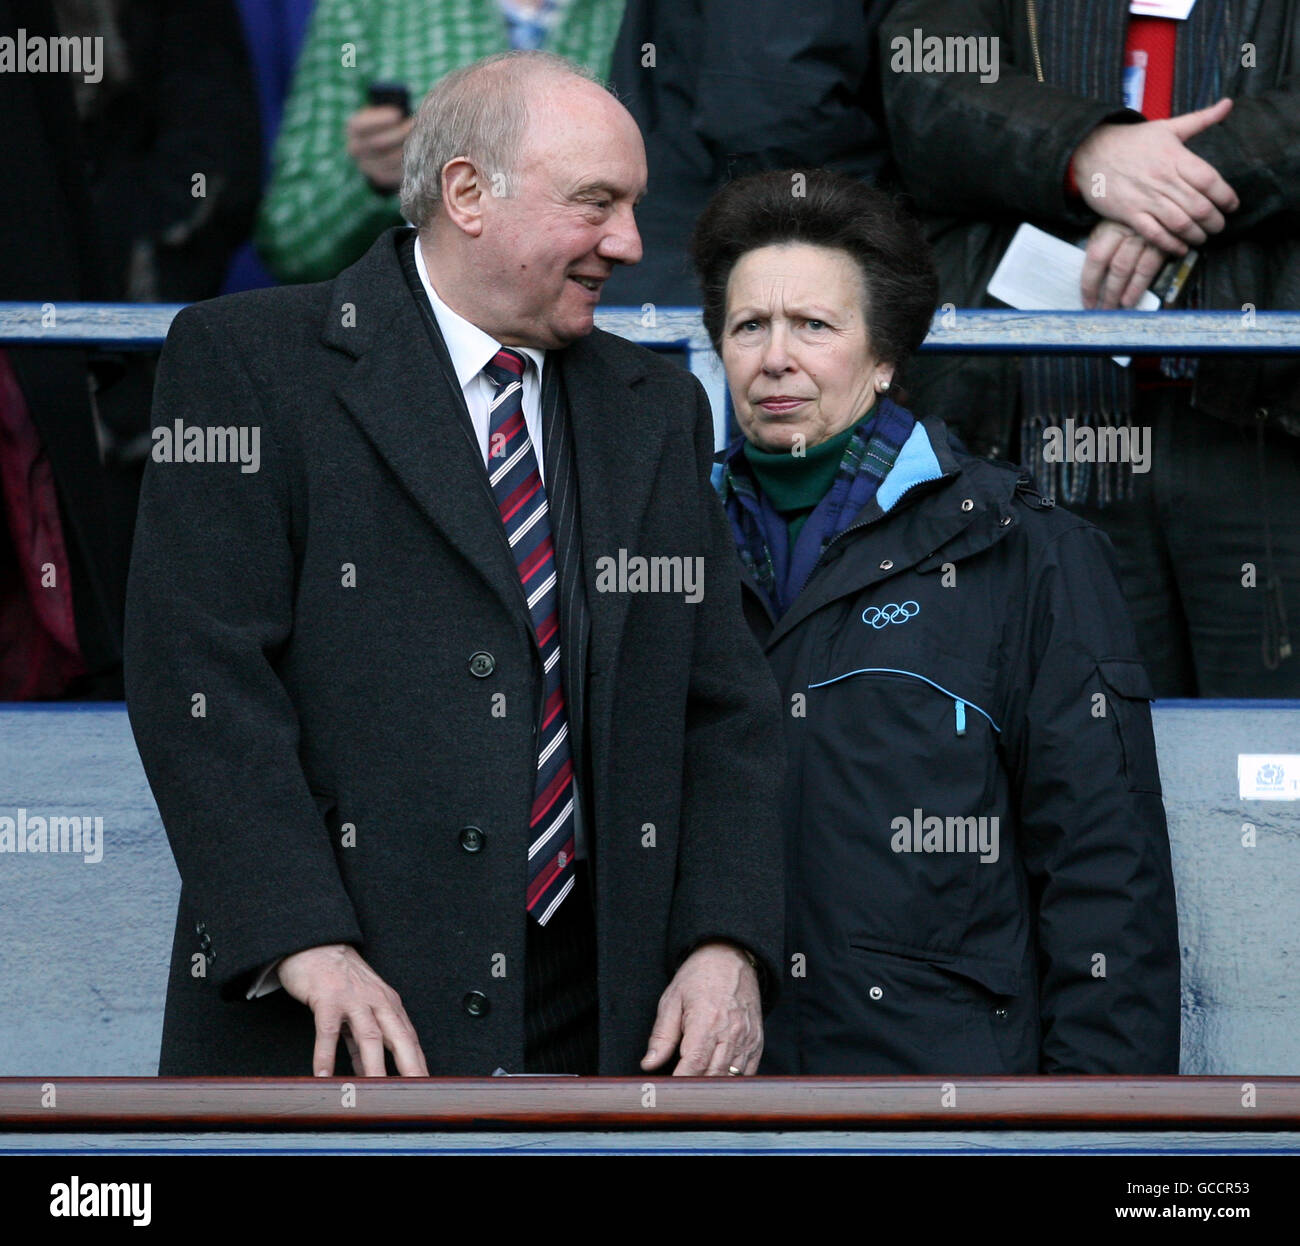 RFU President John Owen (left) and Her Royal Highness the Princess Royal, patron of the SRU, in the stands before kick off Stock Photo